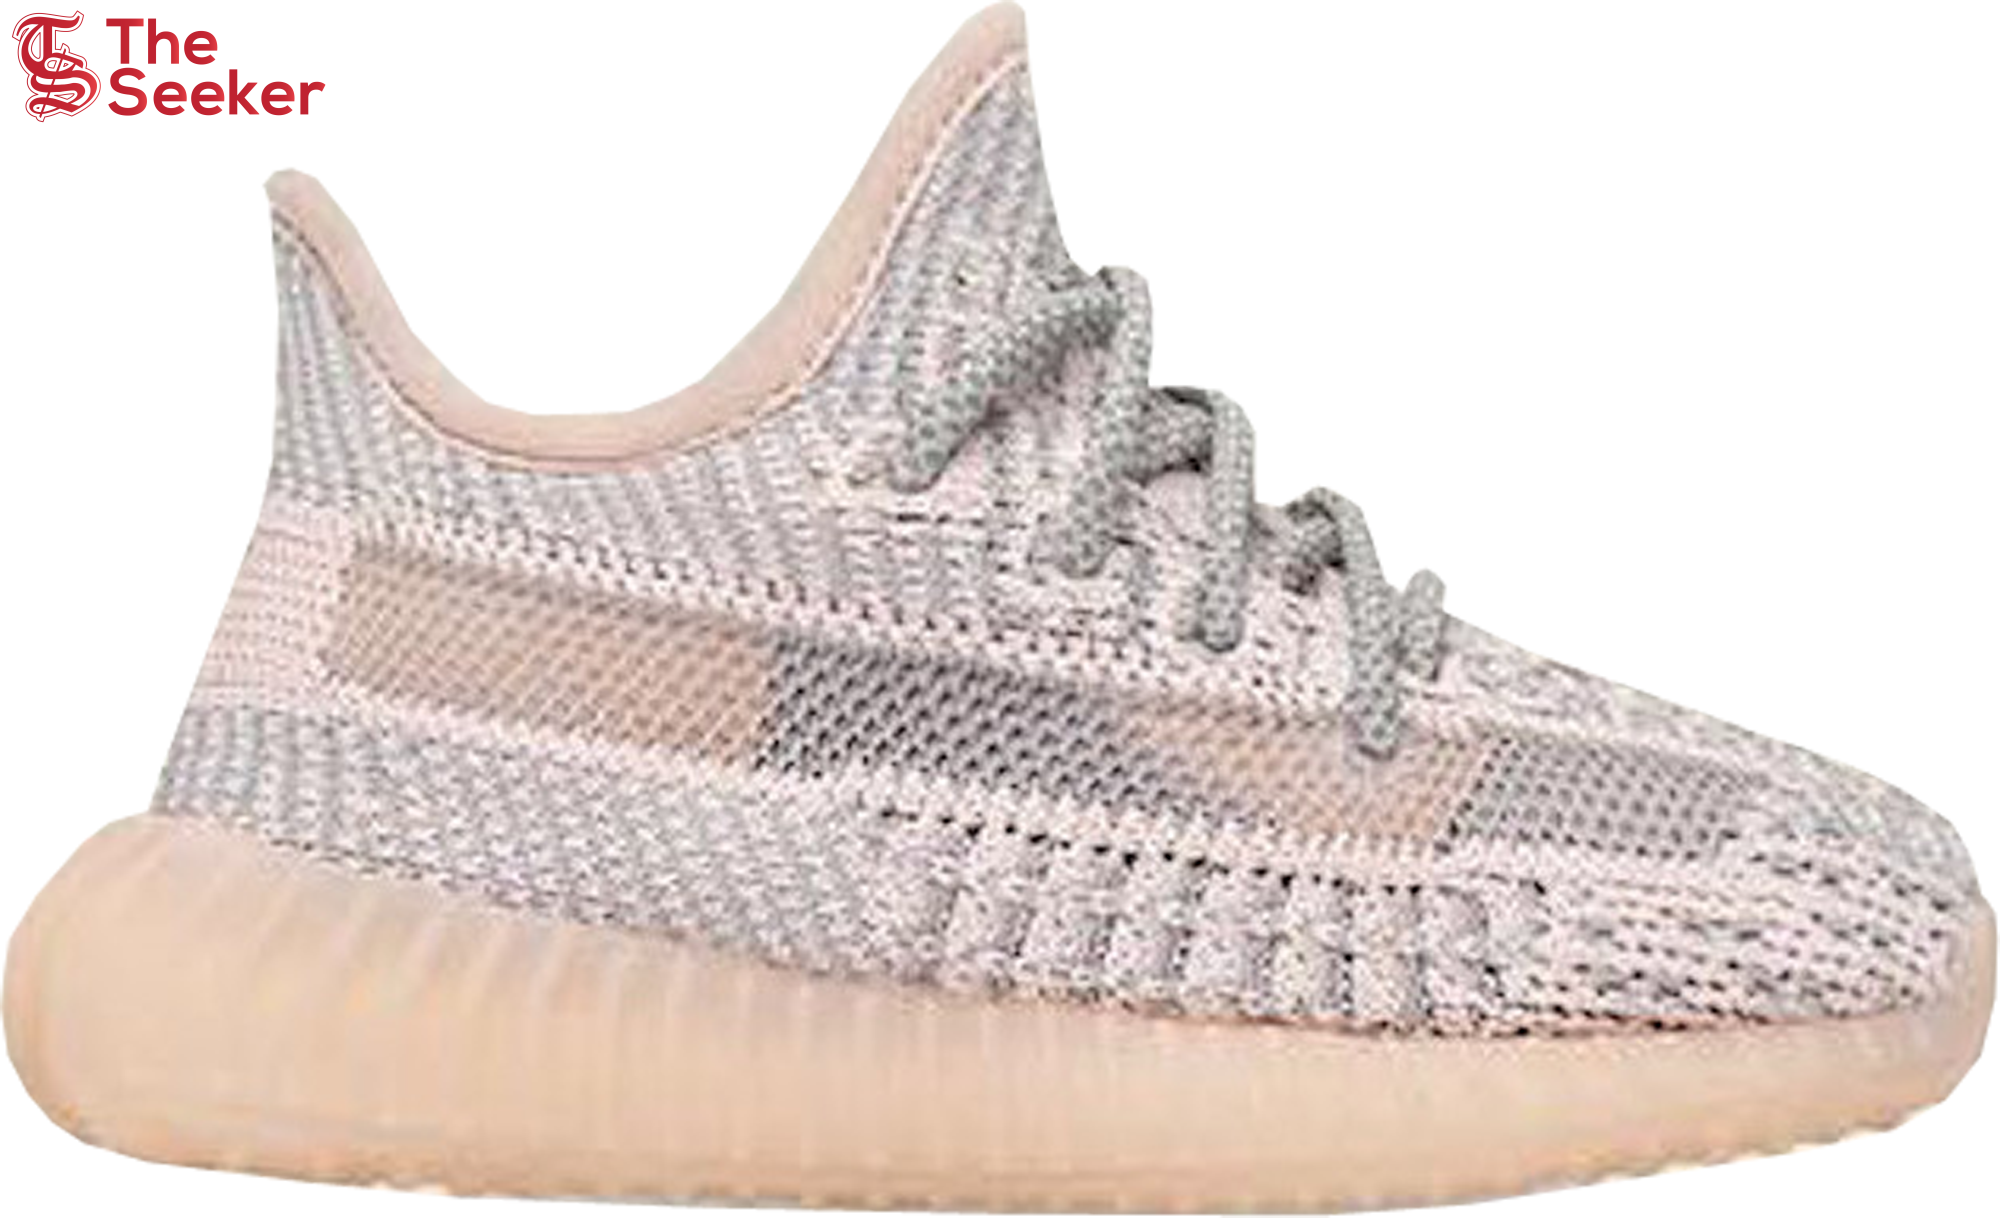 adidas Yeezy Boost 350 V2 Synth (Infants)